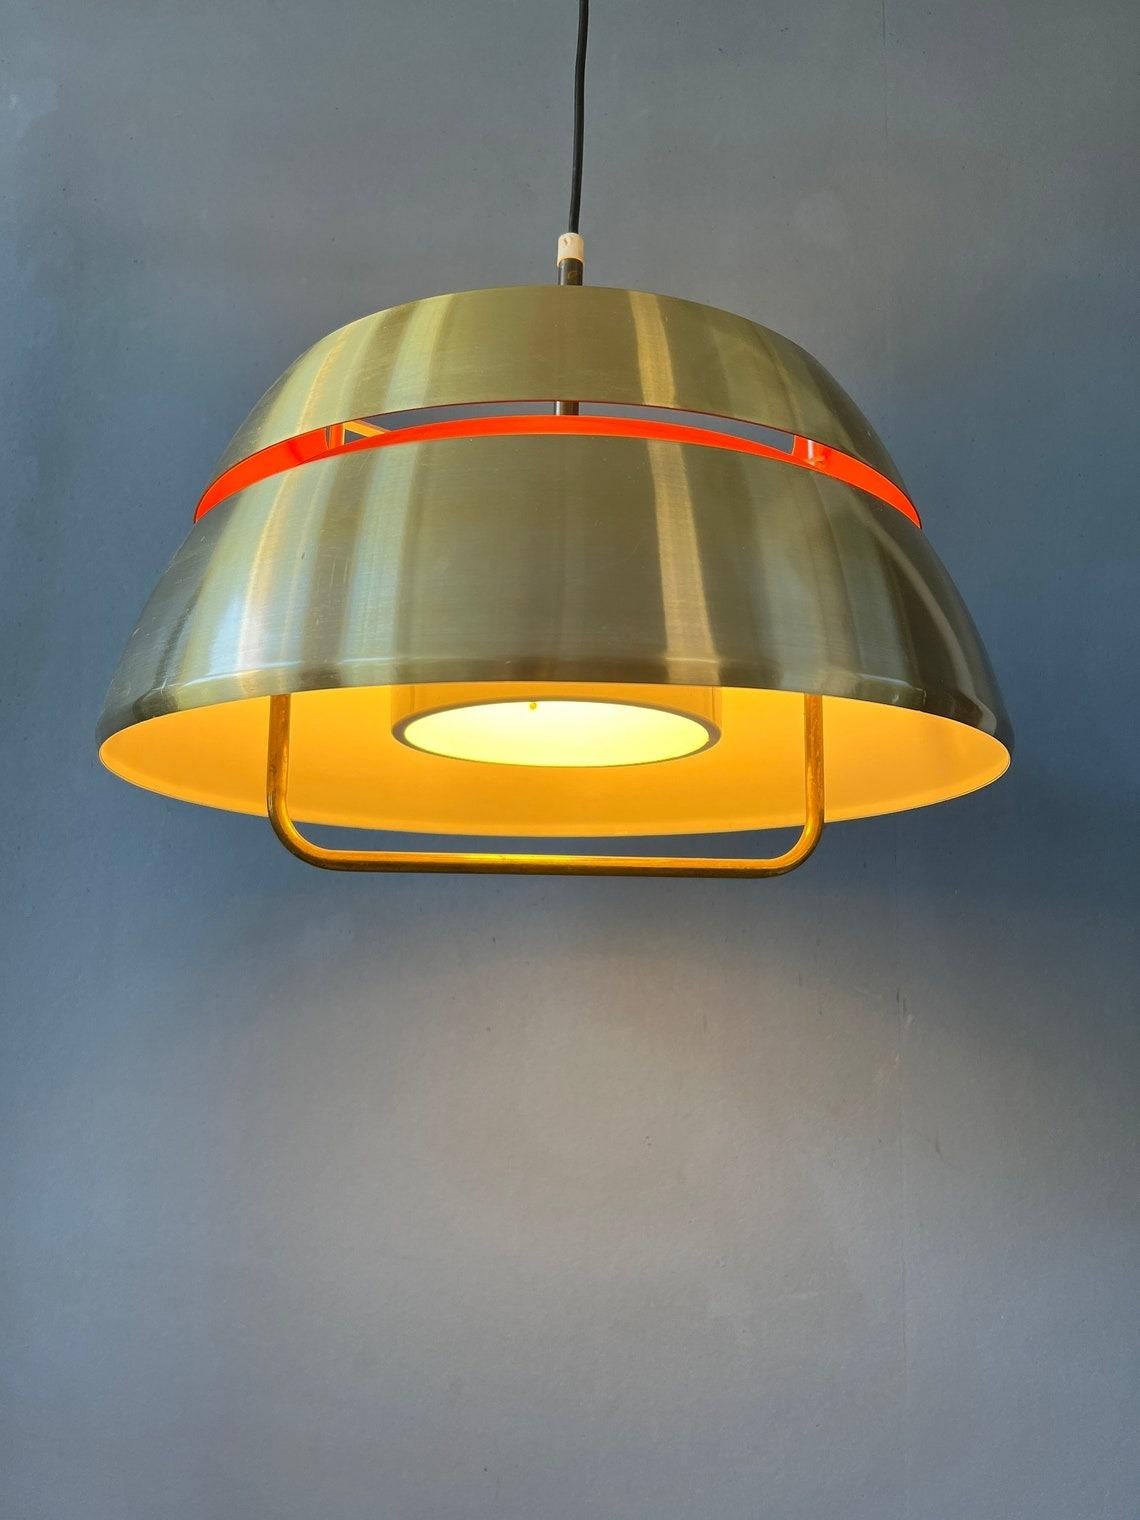 Orange mid century pendant lamp by Lakro Amstelveen. The lamp is made out of steel and has an orange lacquer from the inside. The lamp requires one E27/26 (standard) lightbulb. Please don't hesitate to get in touch if you have any